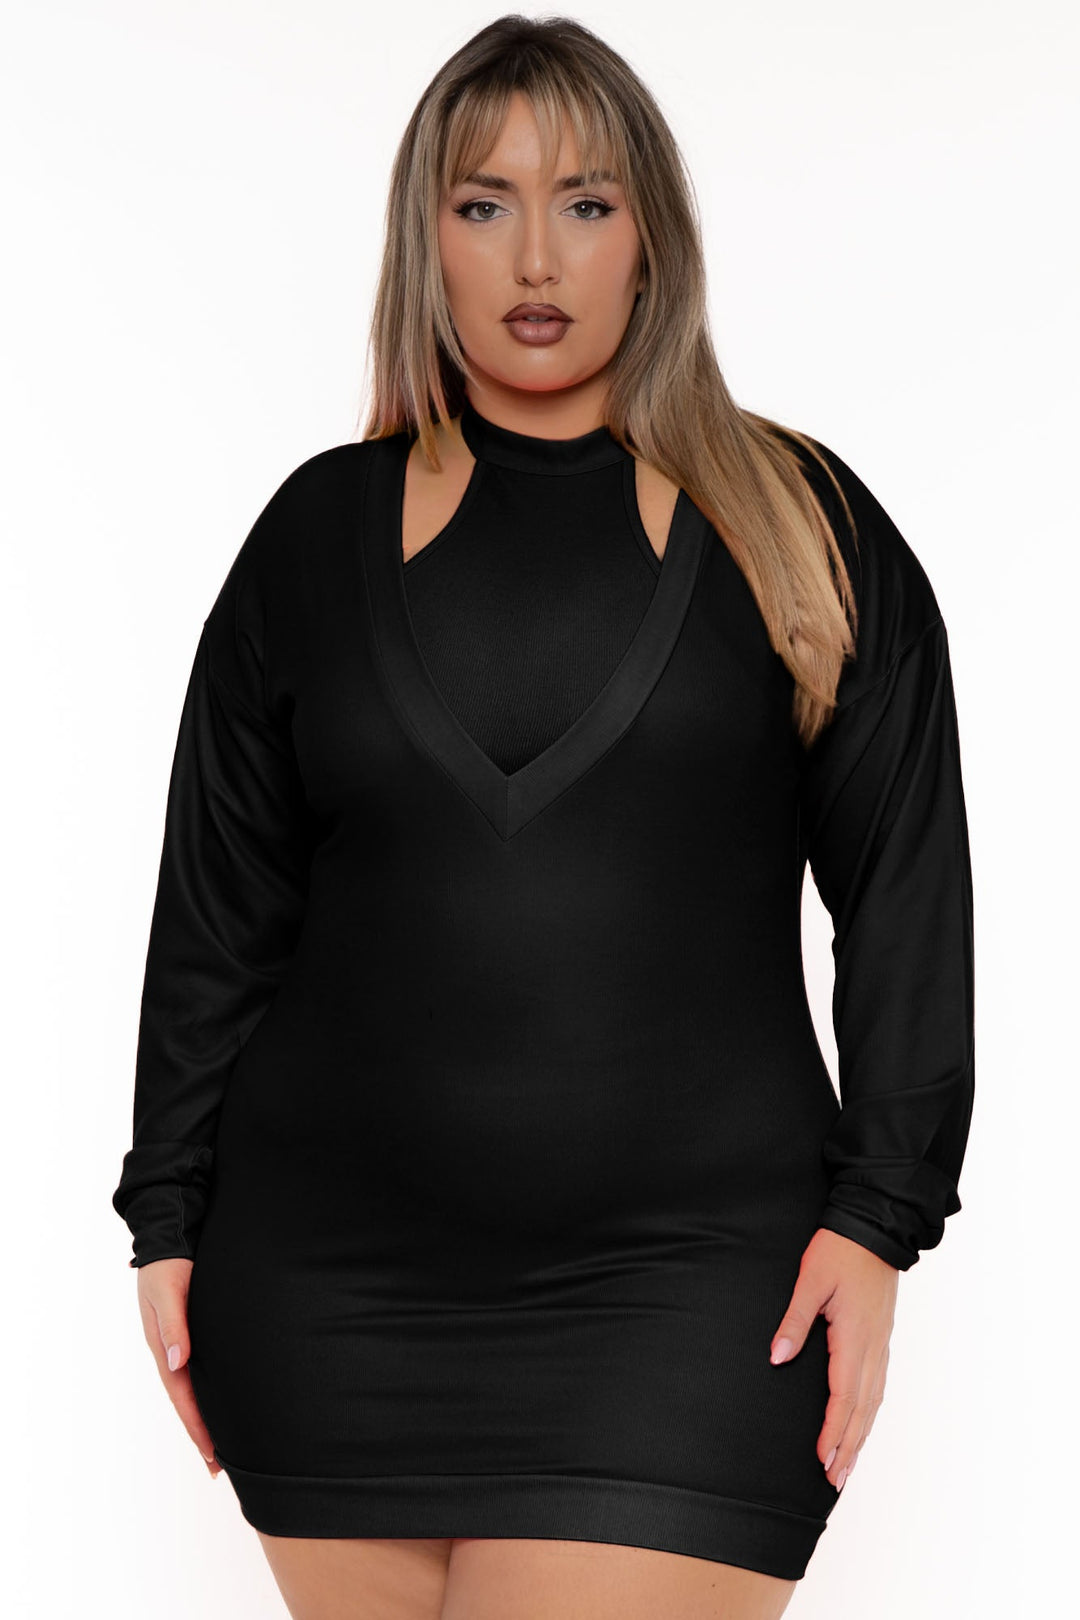 CHICCTHY TOP Matching Sets Plus Size Sweater Dress & Crop top Set  - Black